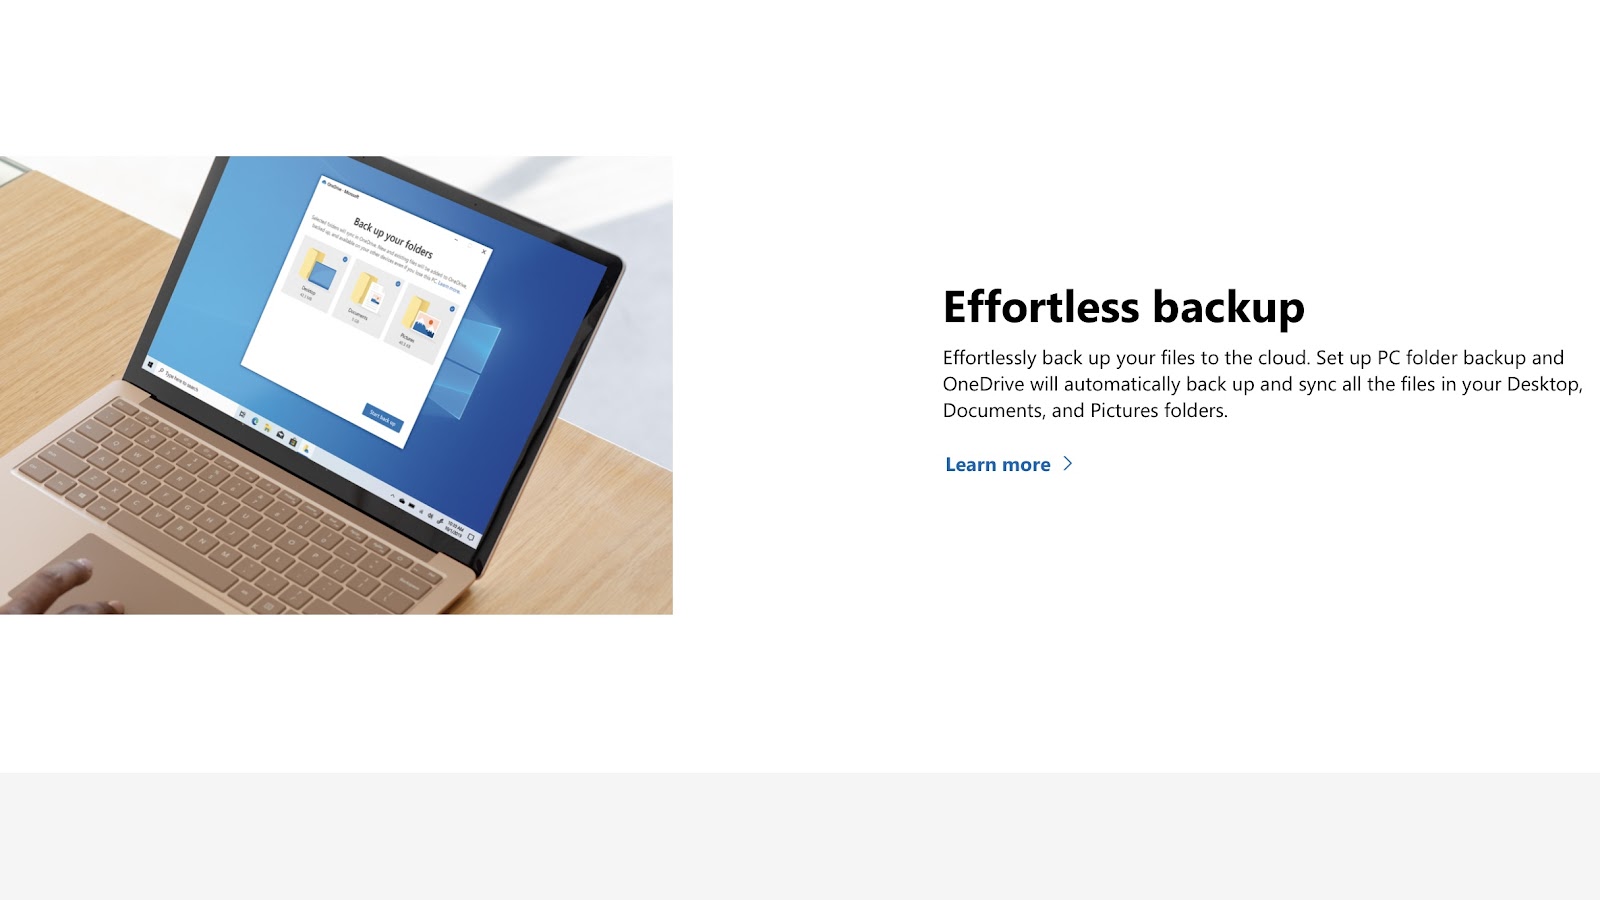 OneDrive's webpage discussing its backups